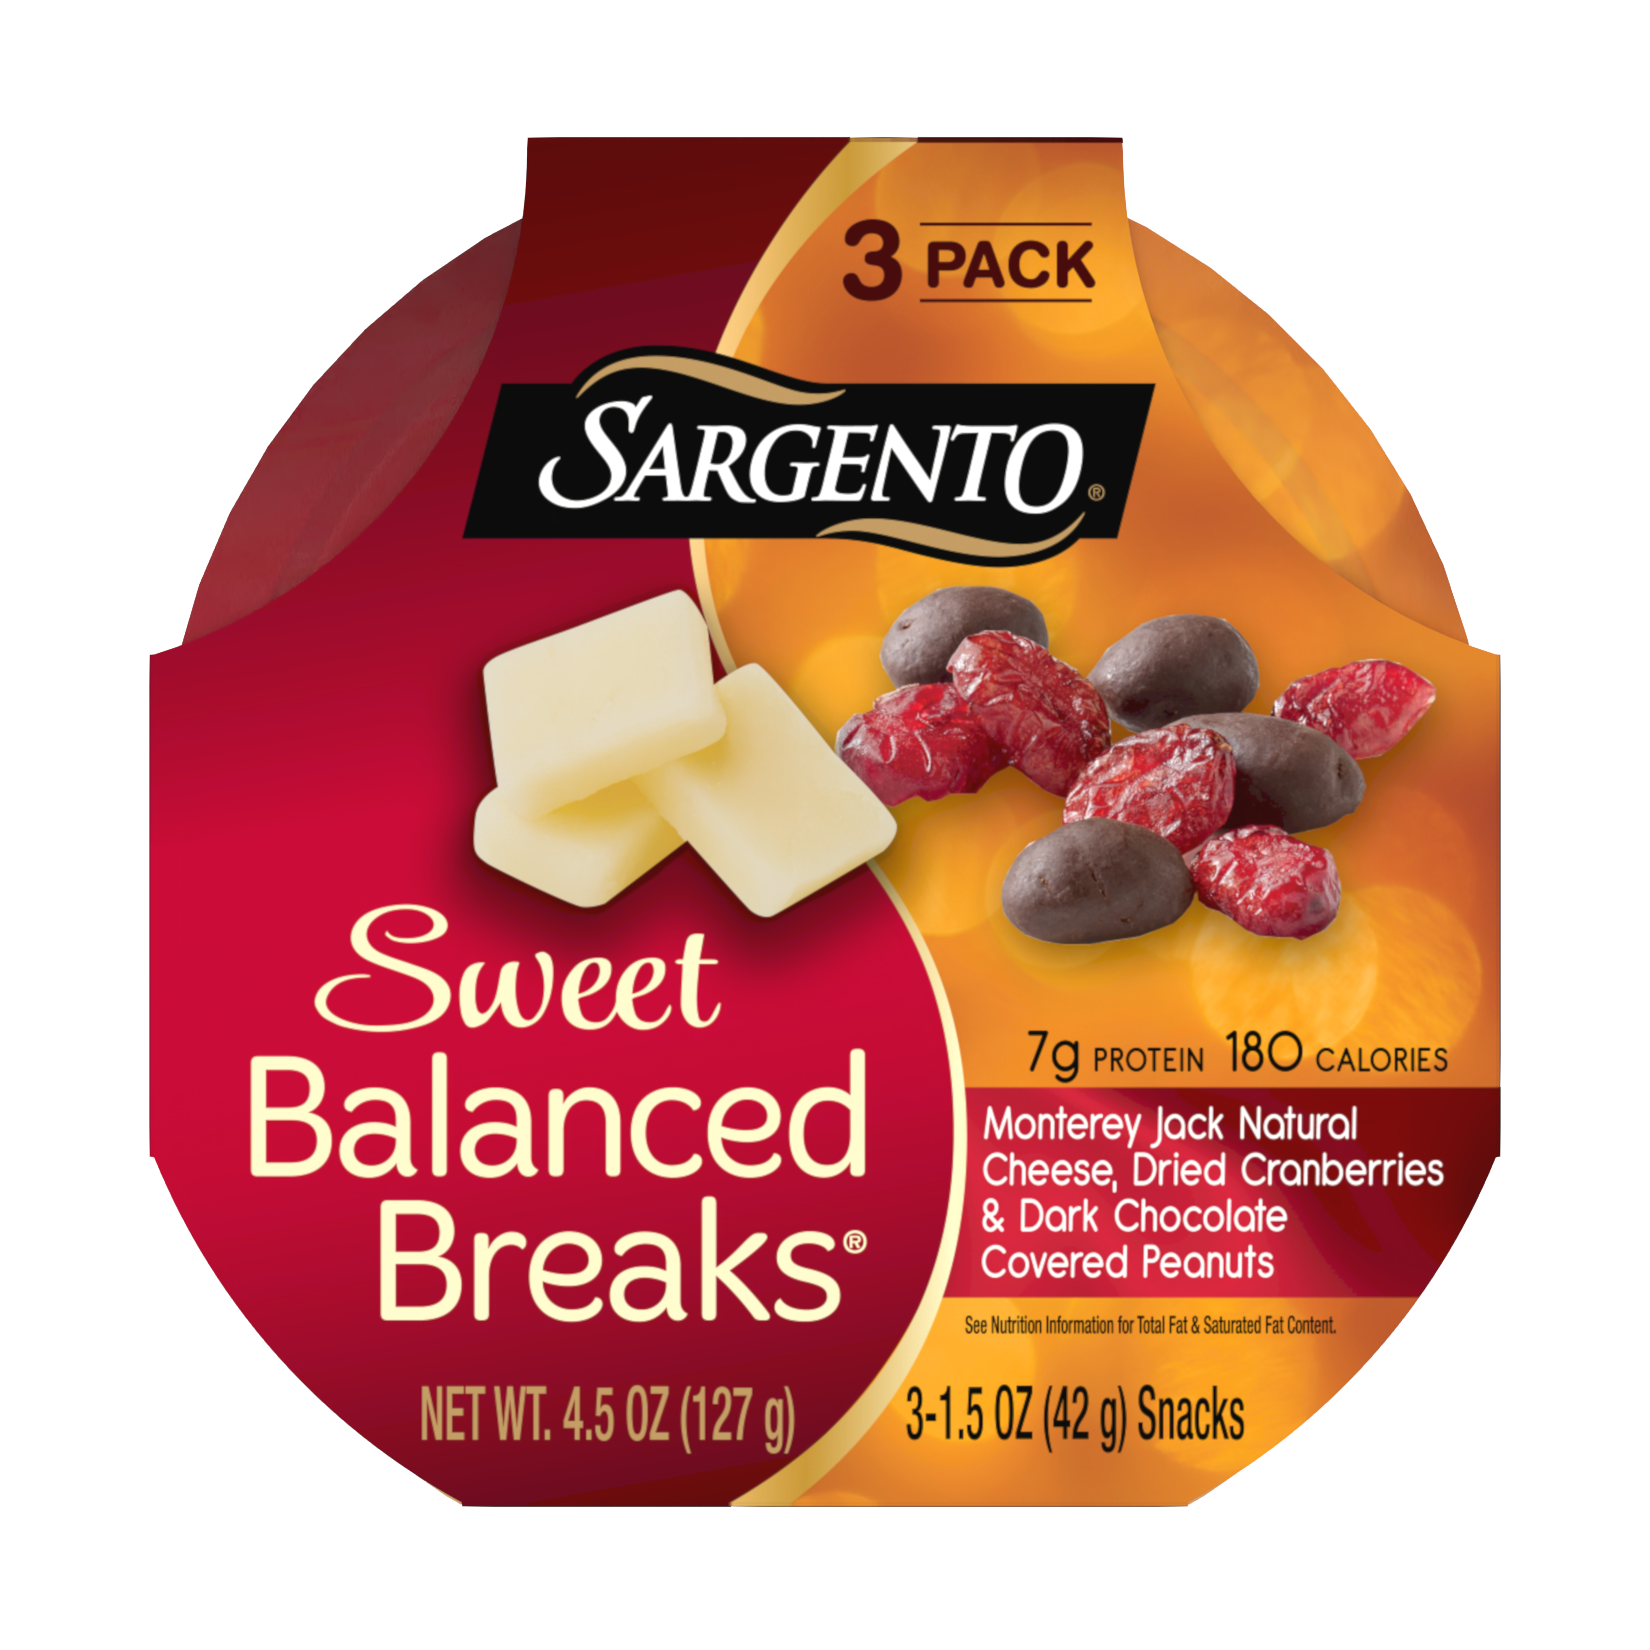 Sargento® Sweet Balanced Breaks®, Monterey Jack Natural Cheese, Dried Cranberries and Dark Chocolate Covered Peanuts